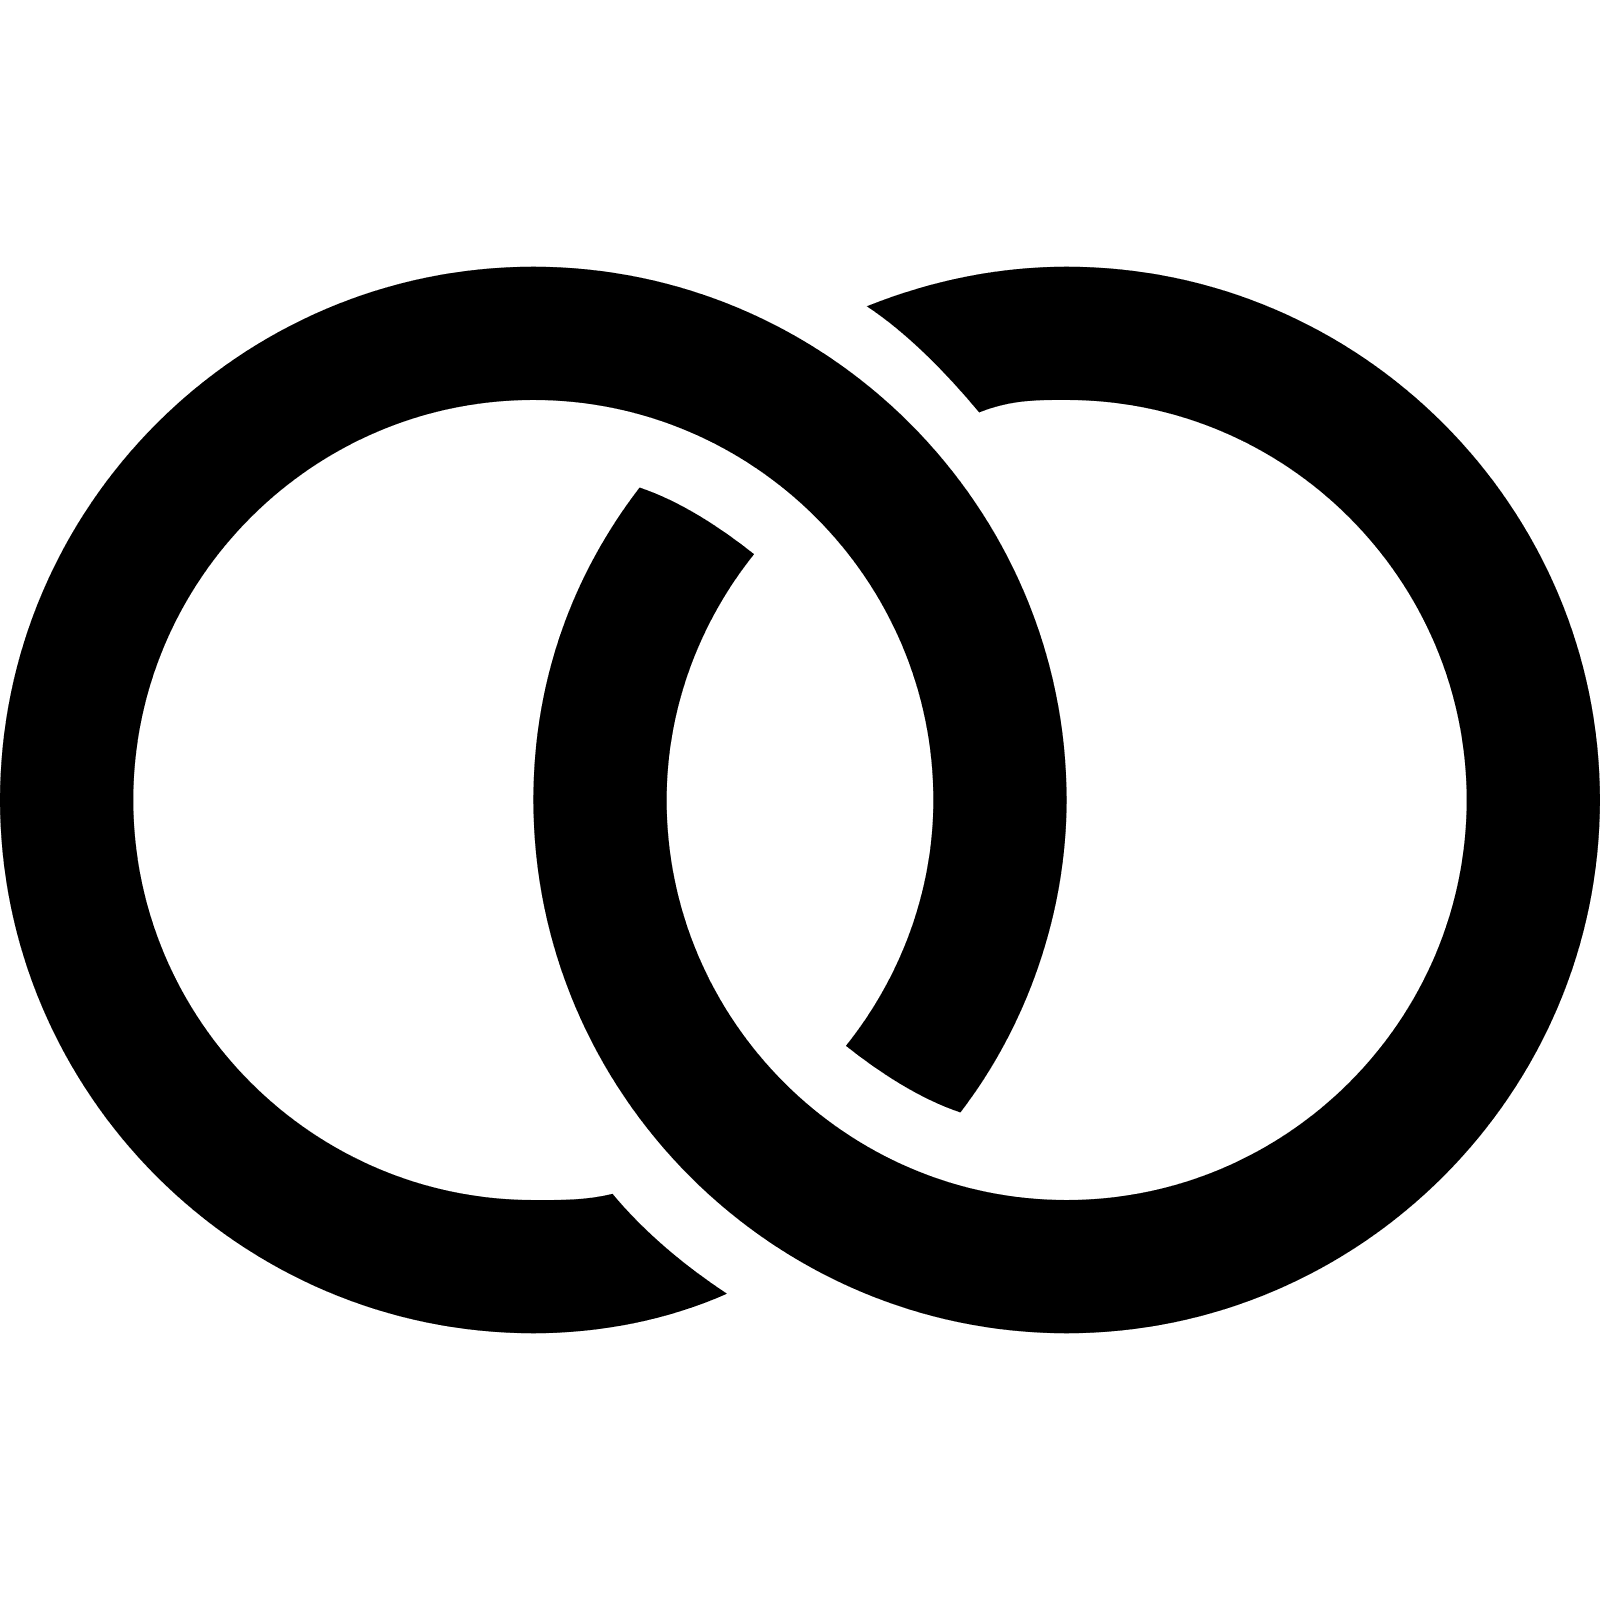 The Icon Of Wedding Rings Consists Of Two Circles Linked Together. The Circles Are Like. Png 50 Px - Eheringe Symbol, Transparent background PNG HD thumbnail